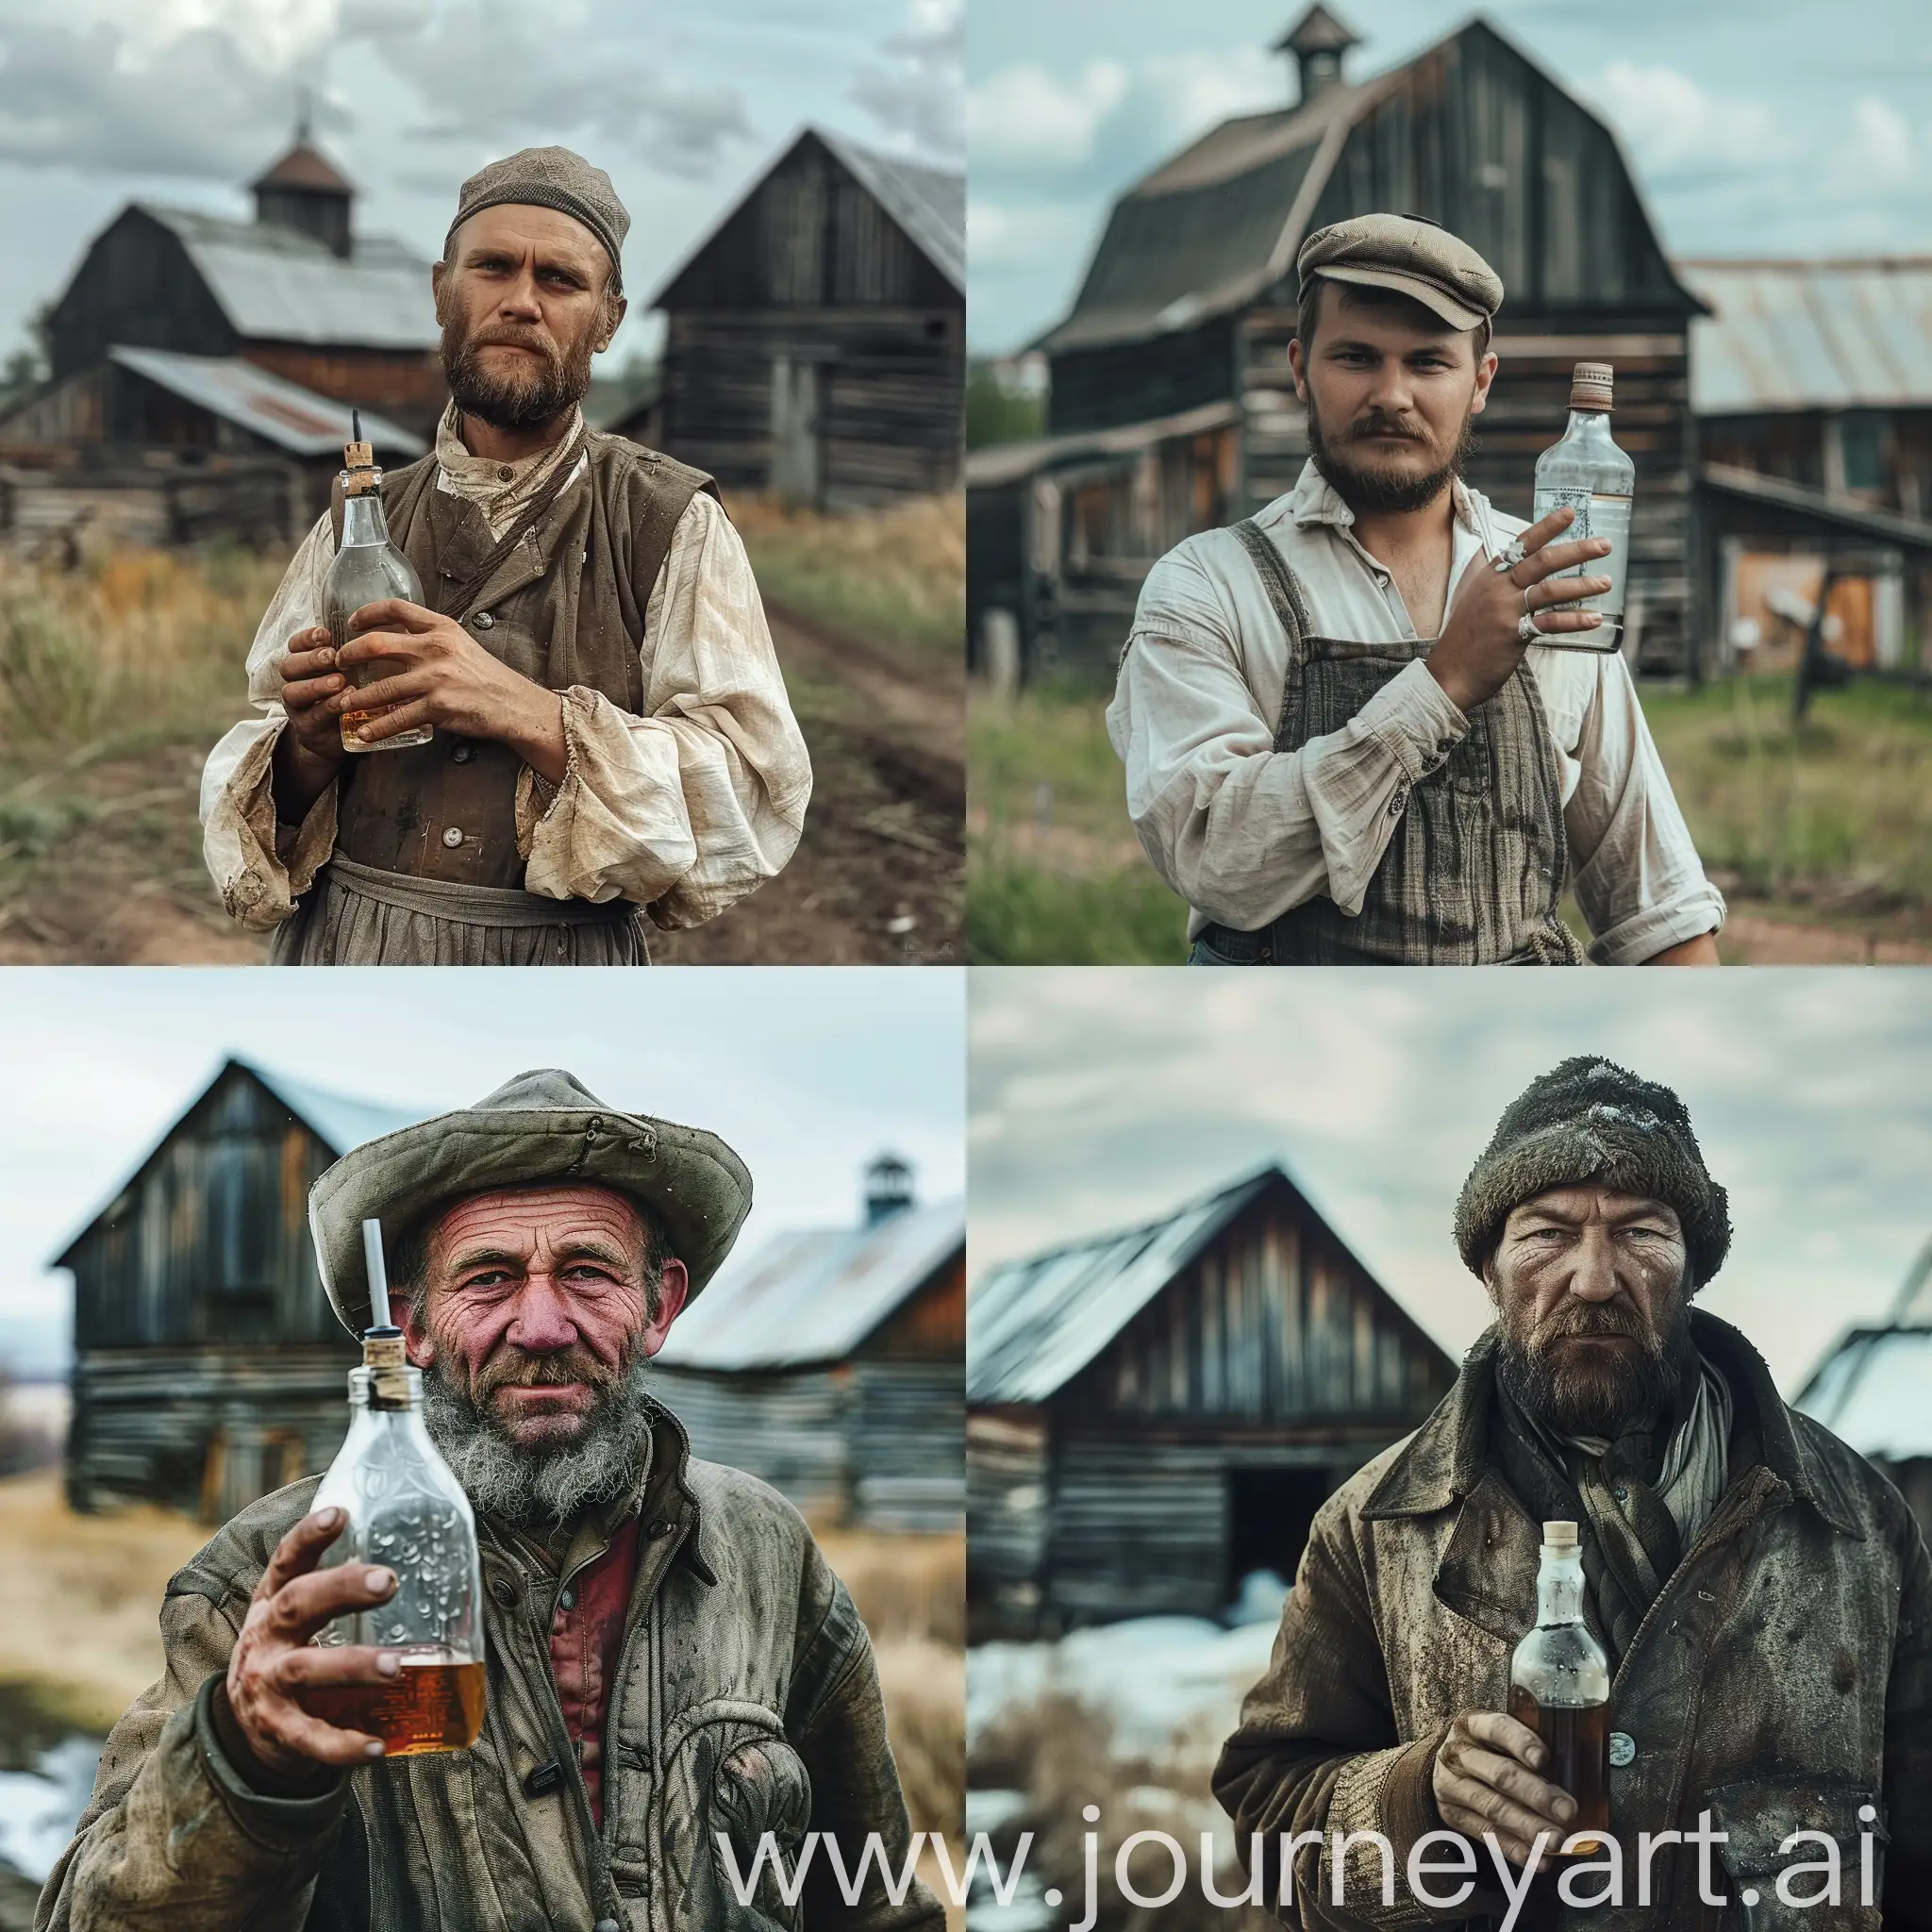 Russian-Man-Holding-Moonshine-Bottle-in-Front-of-Barns